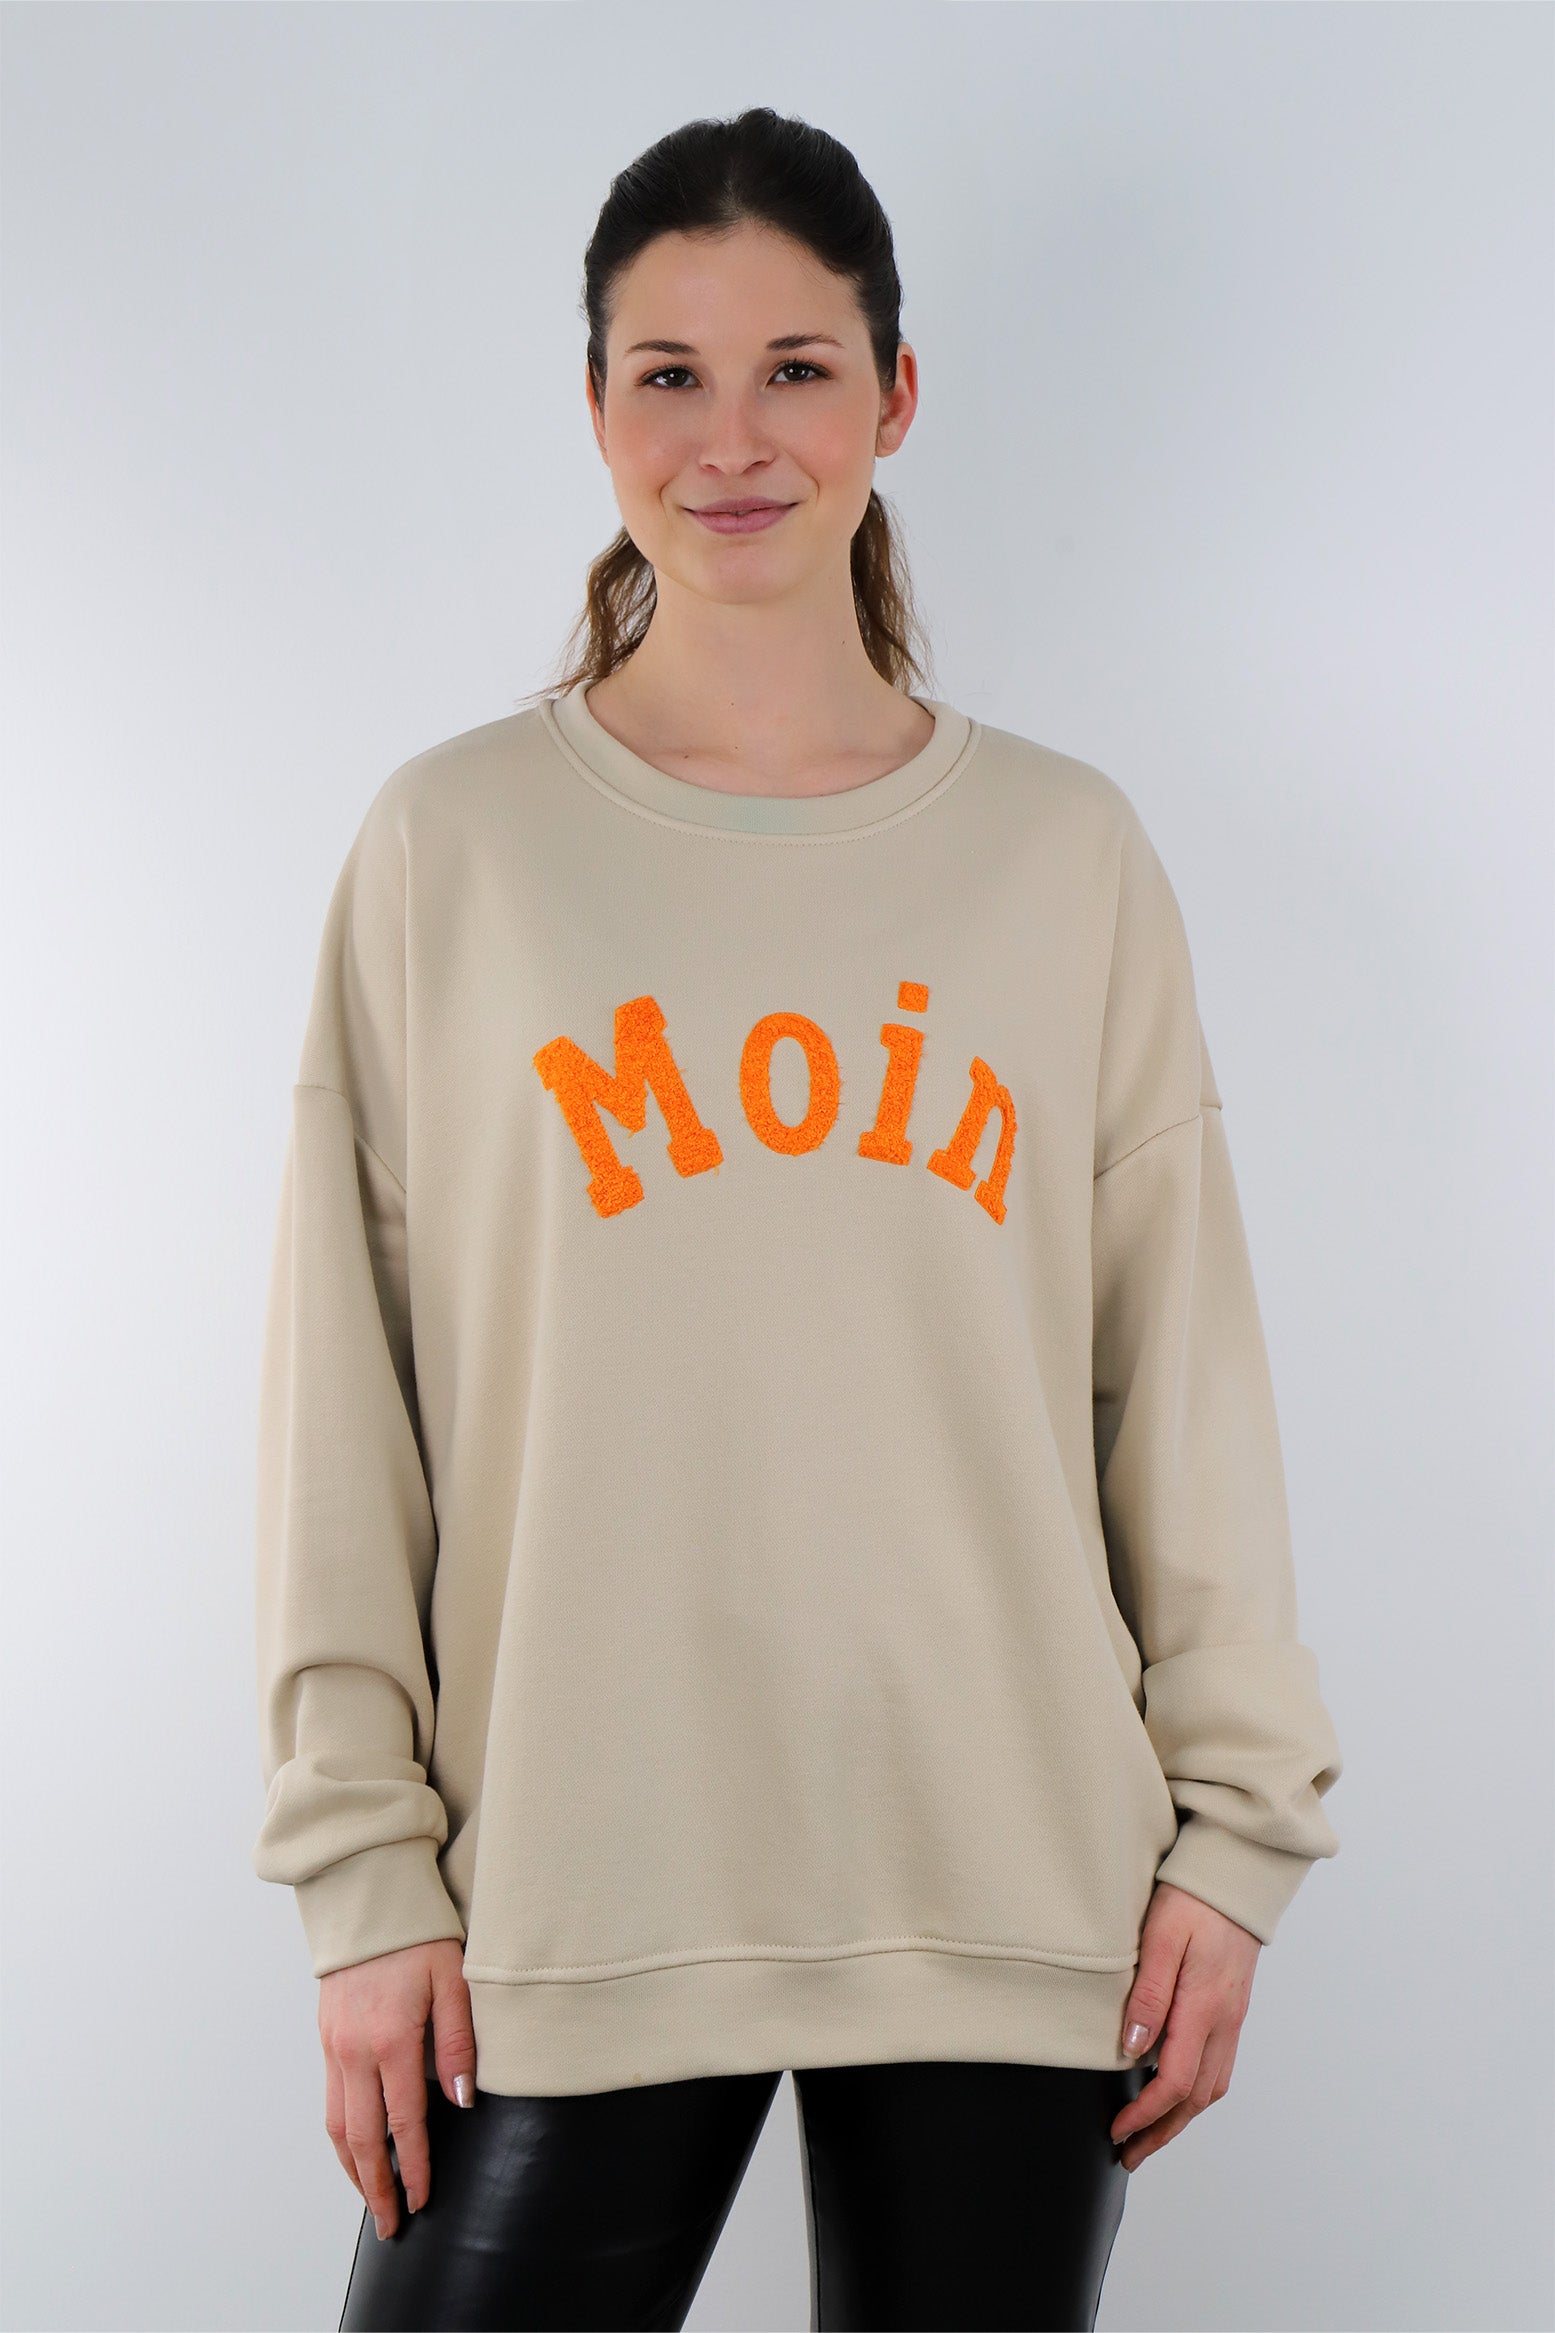 Selected Touch Sweatshirt "Moin" - Beige